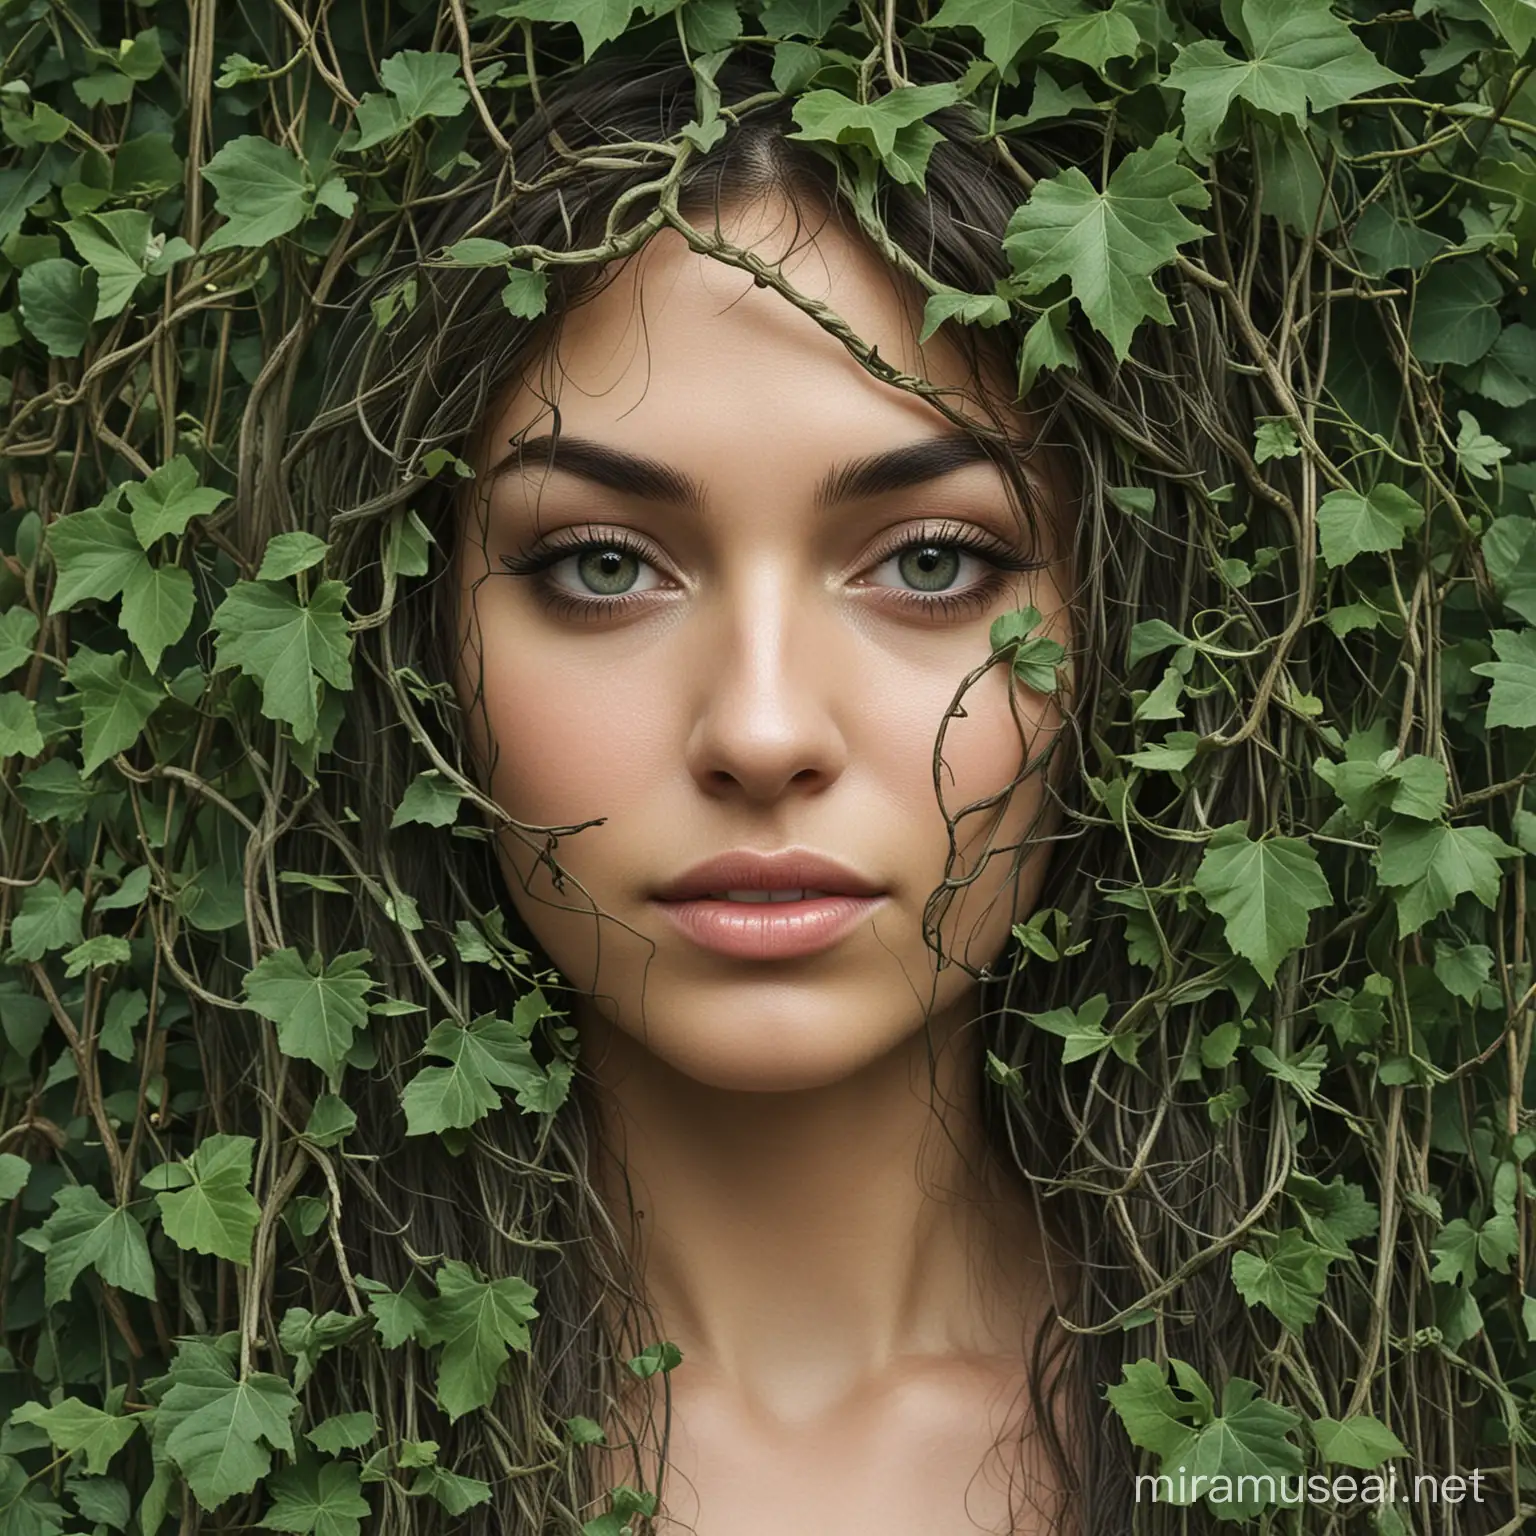 vines creating a female face